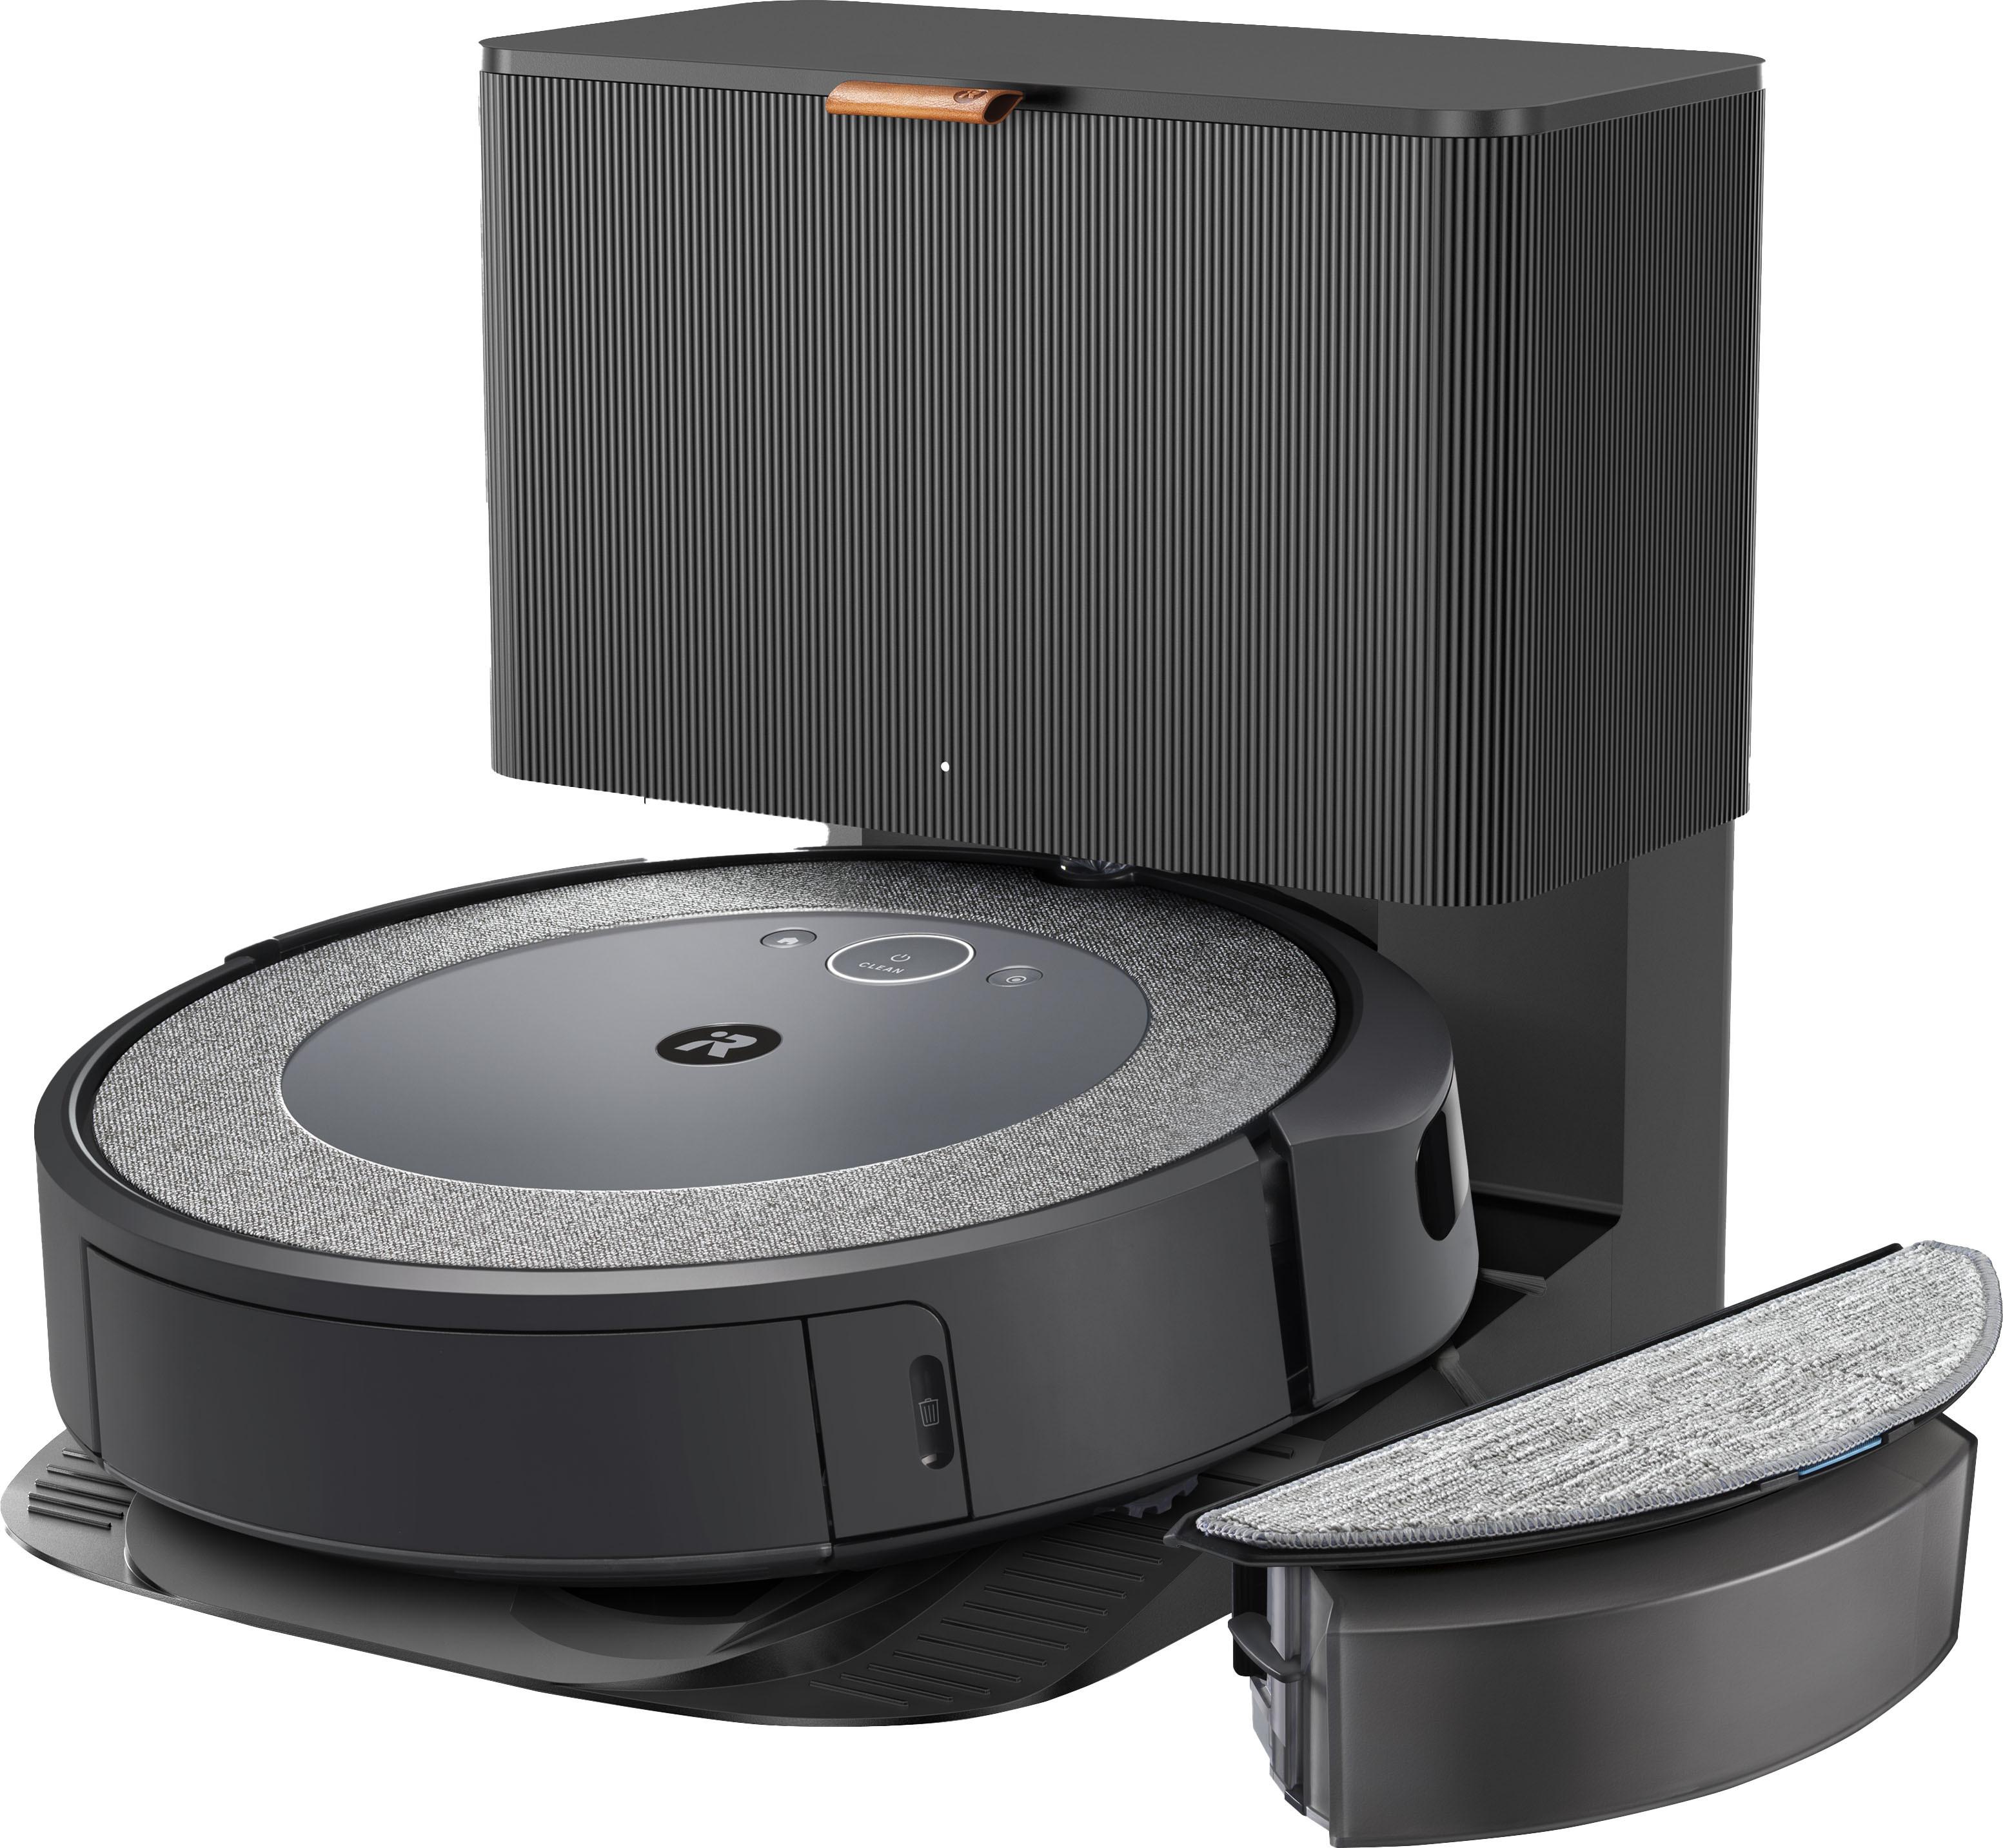 The Best Self-Emptying Robot Vacuum Is Nearly 30% Off on